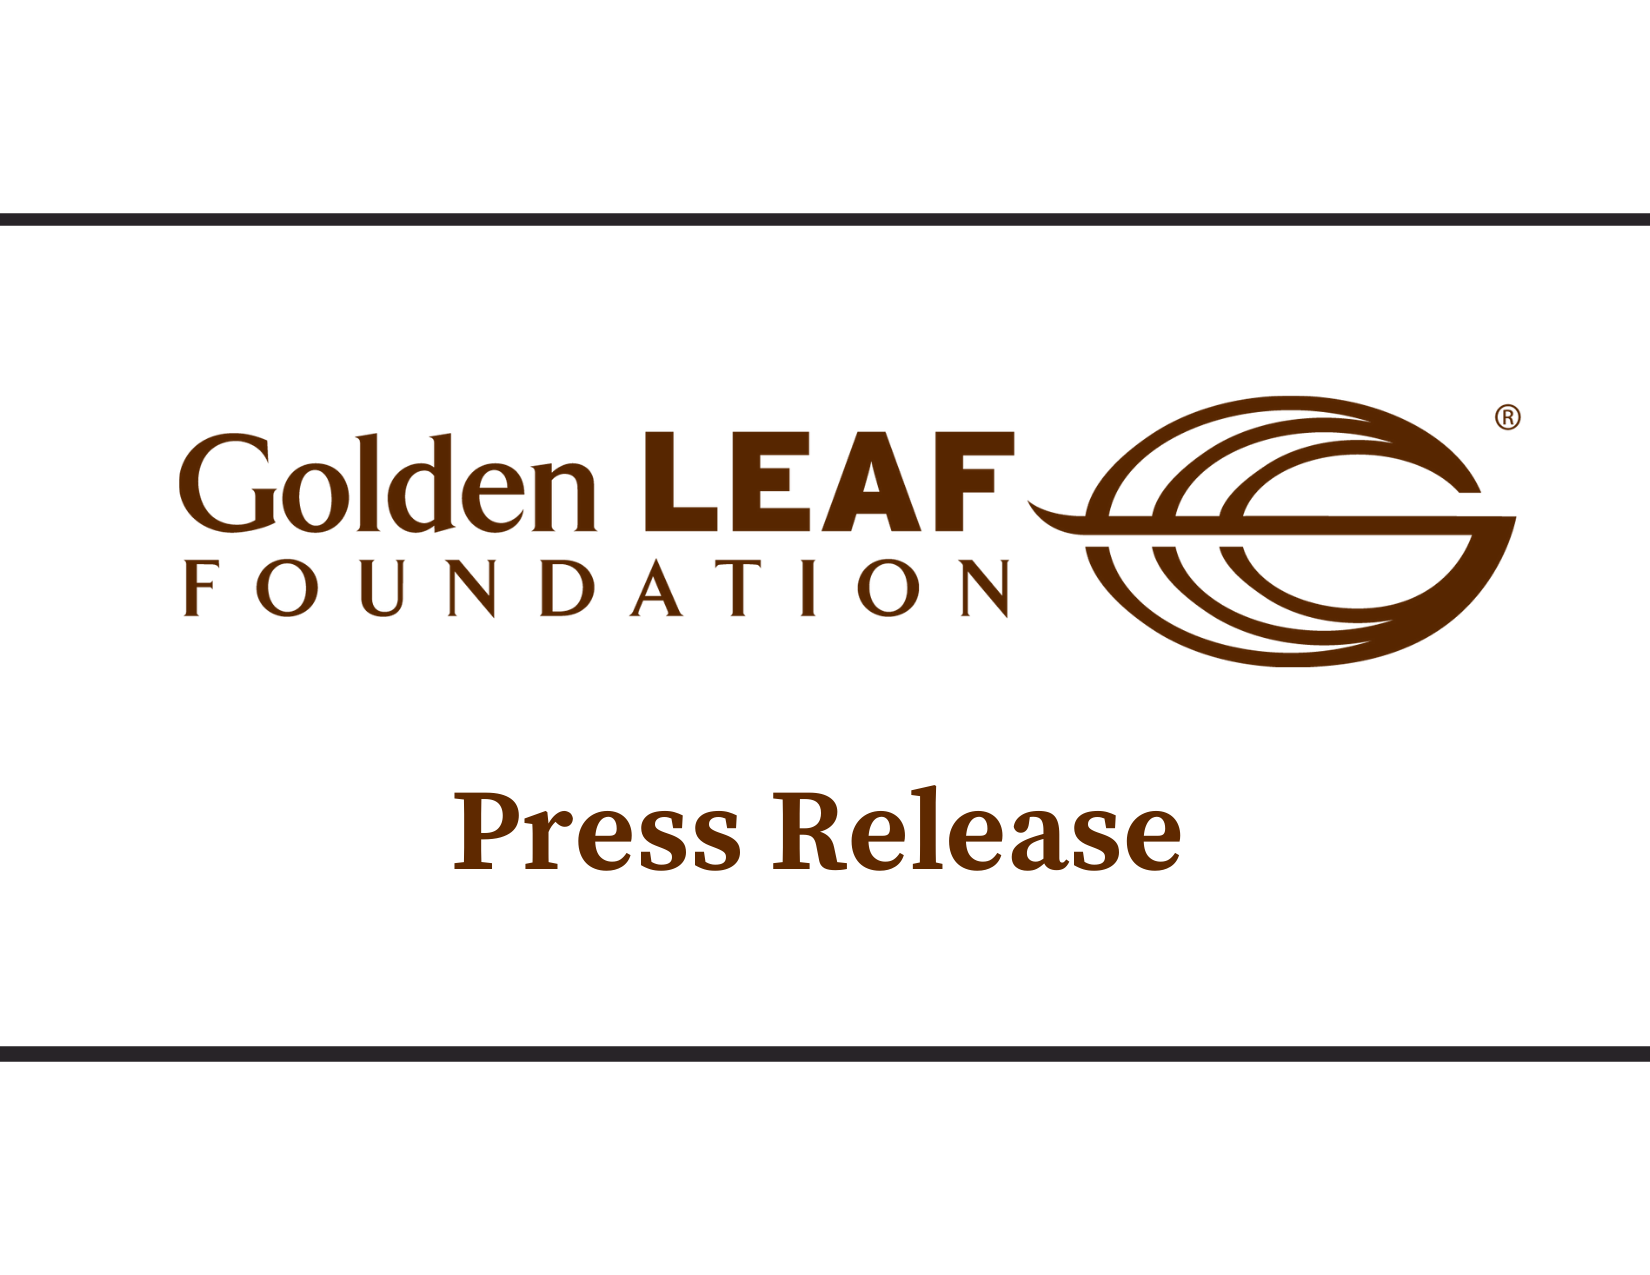 Golden LEAF announces $15.2 million in awards, leverages $14 million in other funds